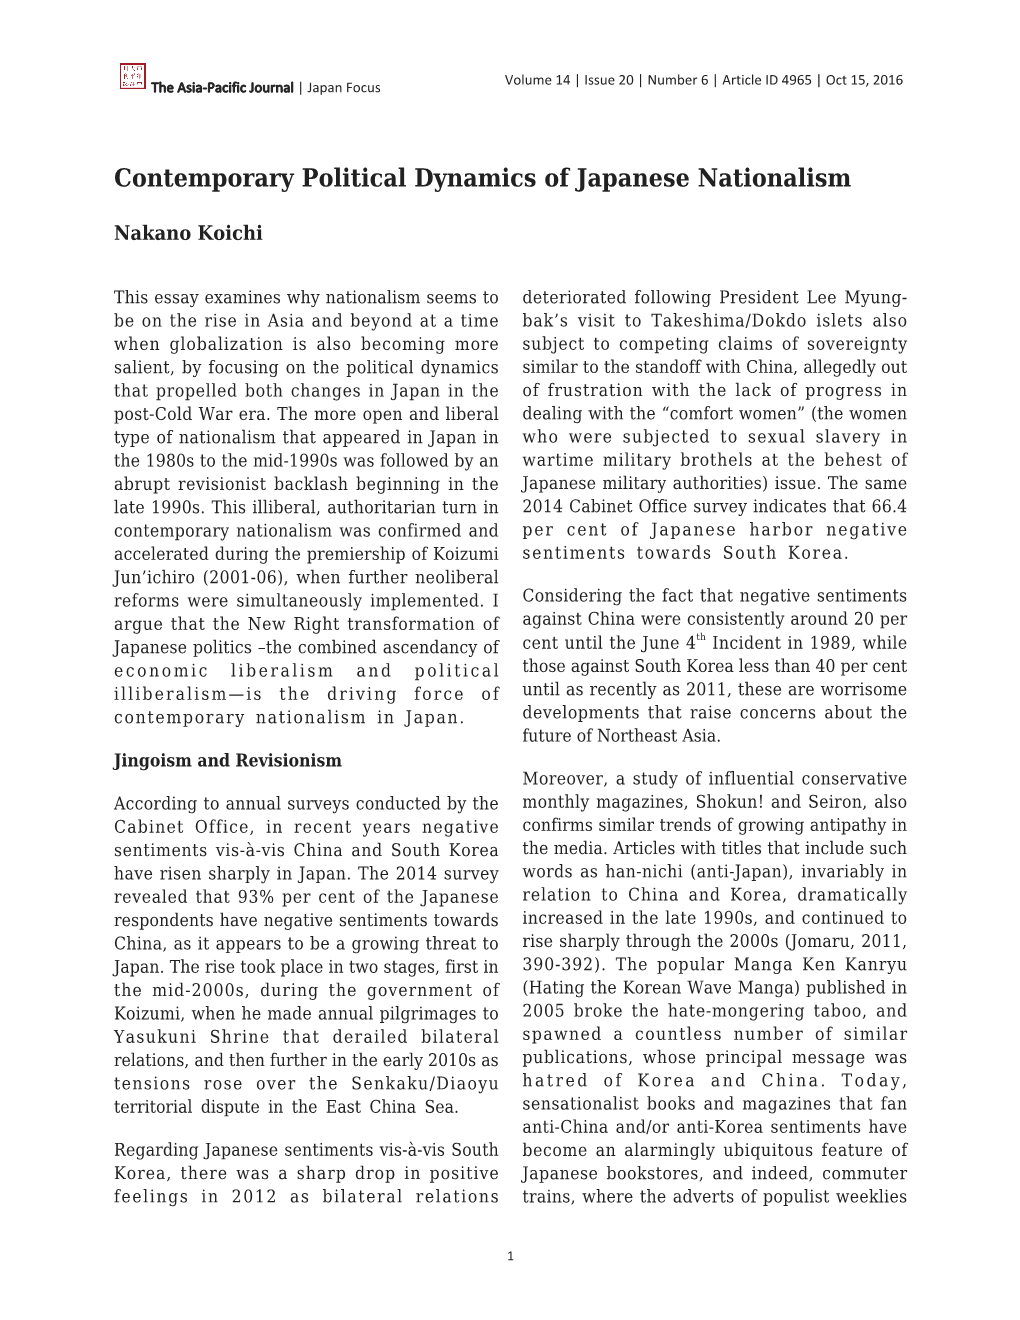 Contemporary Political Dynamics of Japanese Nationalism